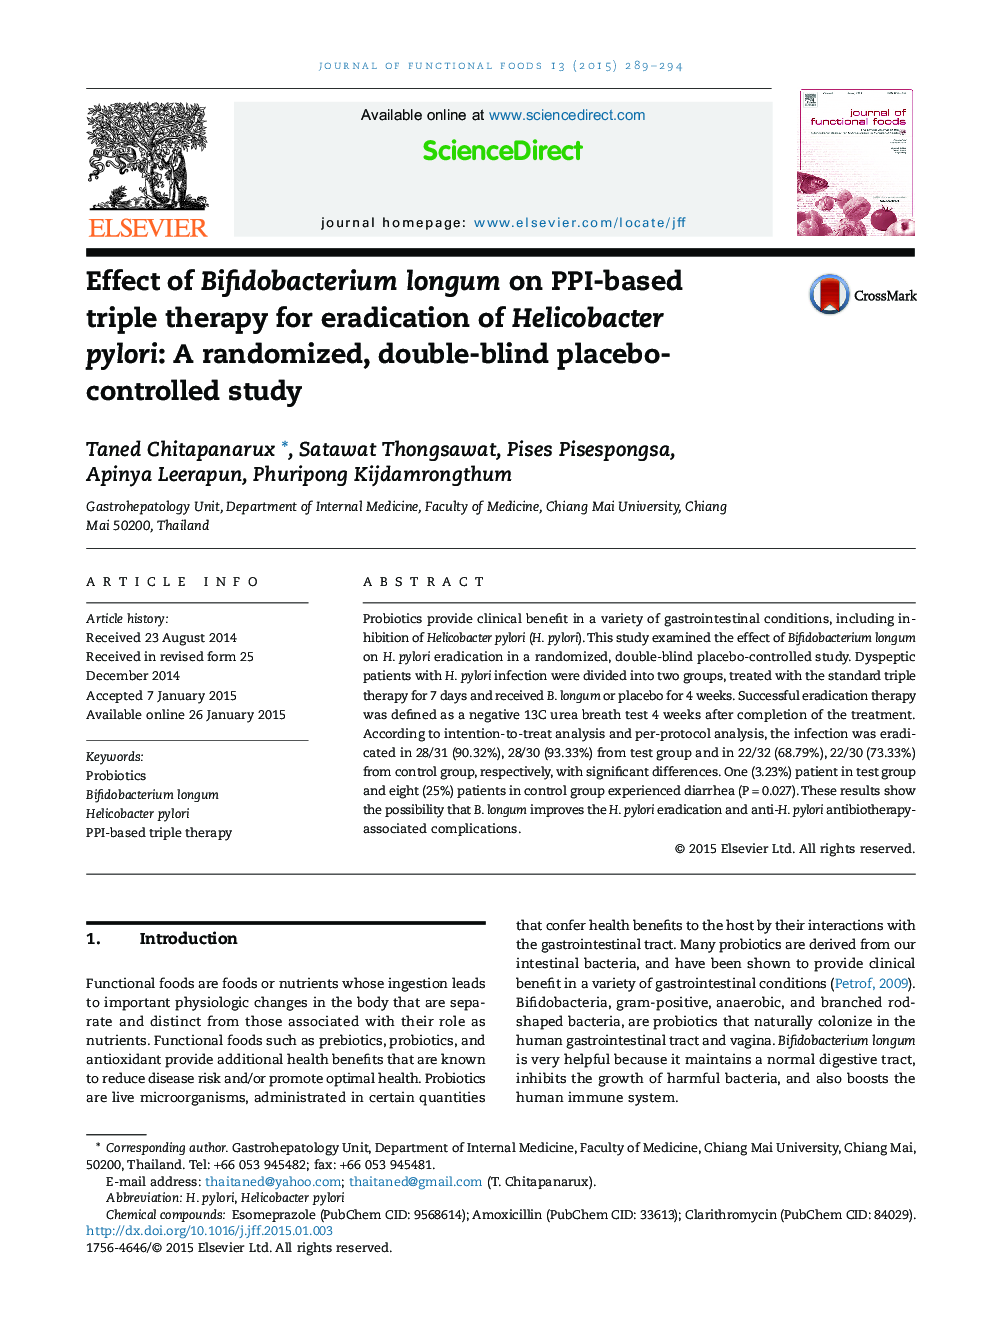 Effect of Bifidobacterium longum on PPI-based triple therapy for eradication of Helicobacter pylori: A randomized, double-blind placebo-controlled study